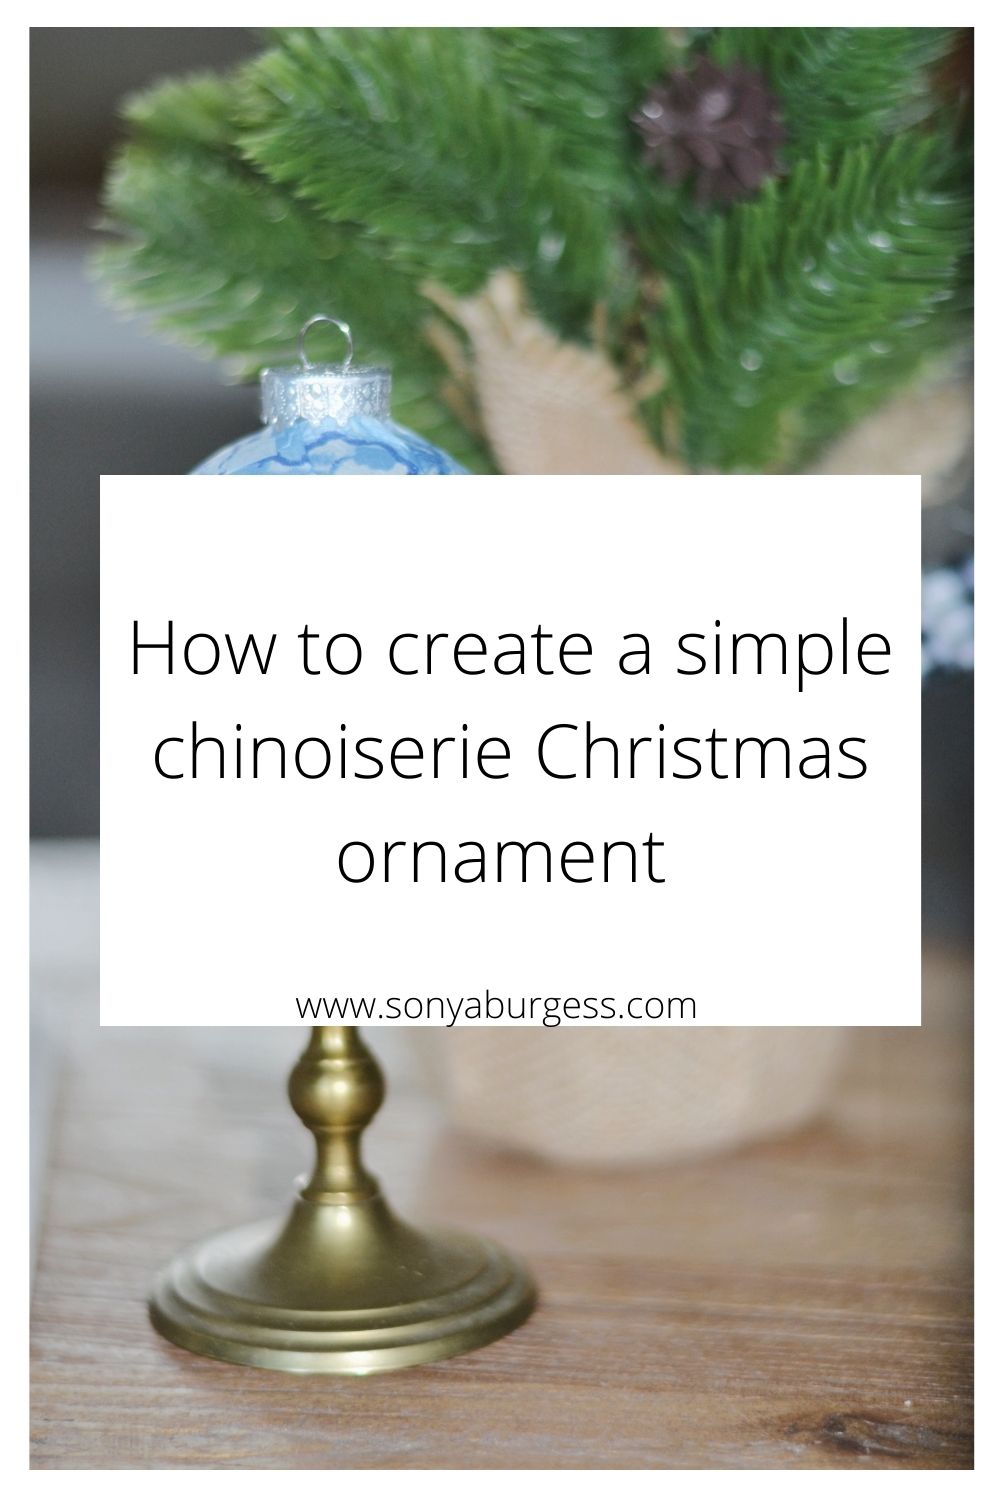 How to create a simple chinoiserie Christmas ornament